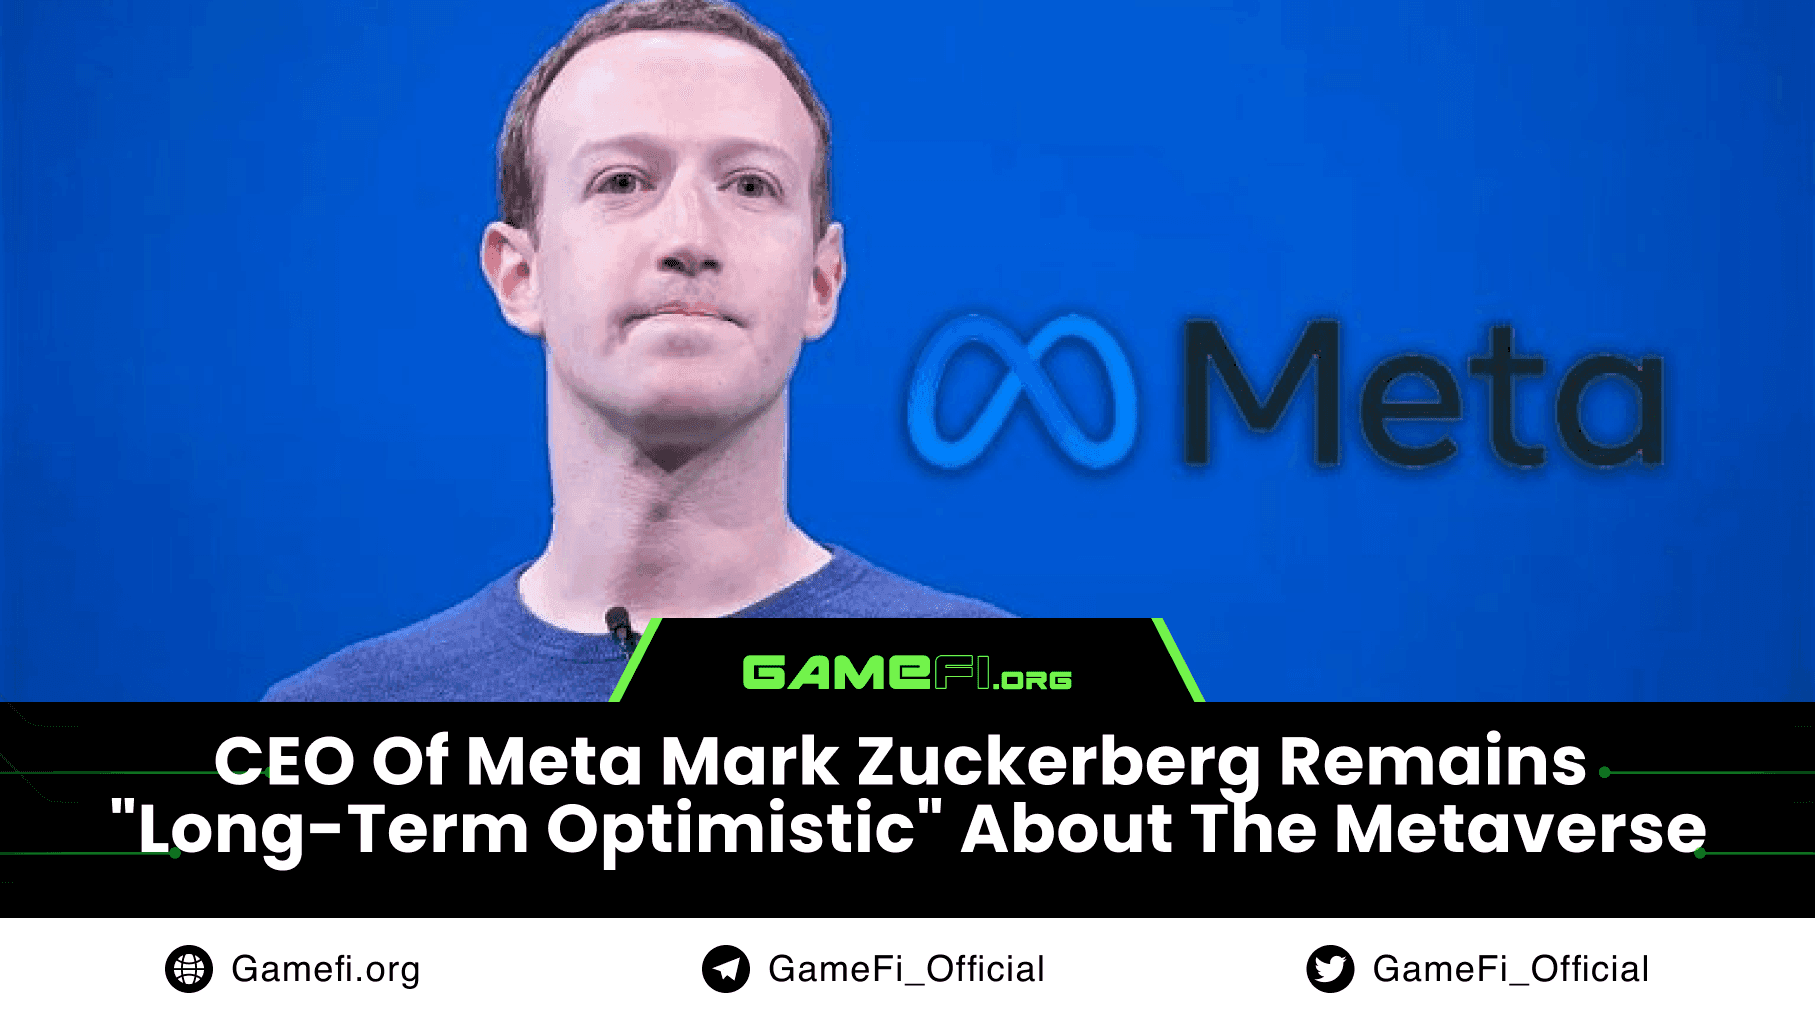 CEO Of Meta Mark Zuckerberg Remains "Long-Term Optimistic" About The Metaverse